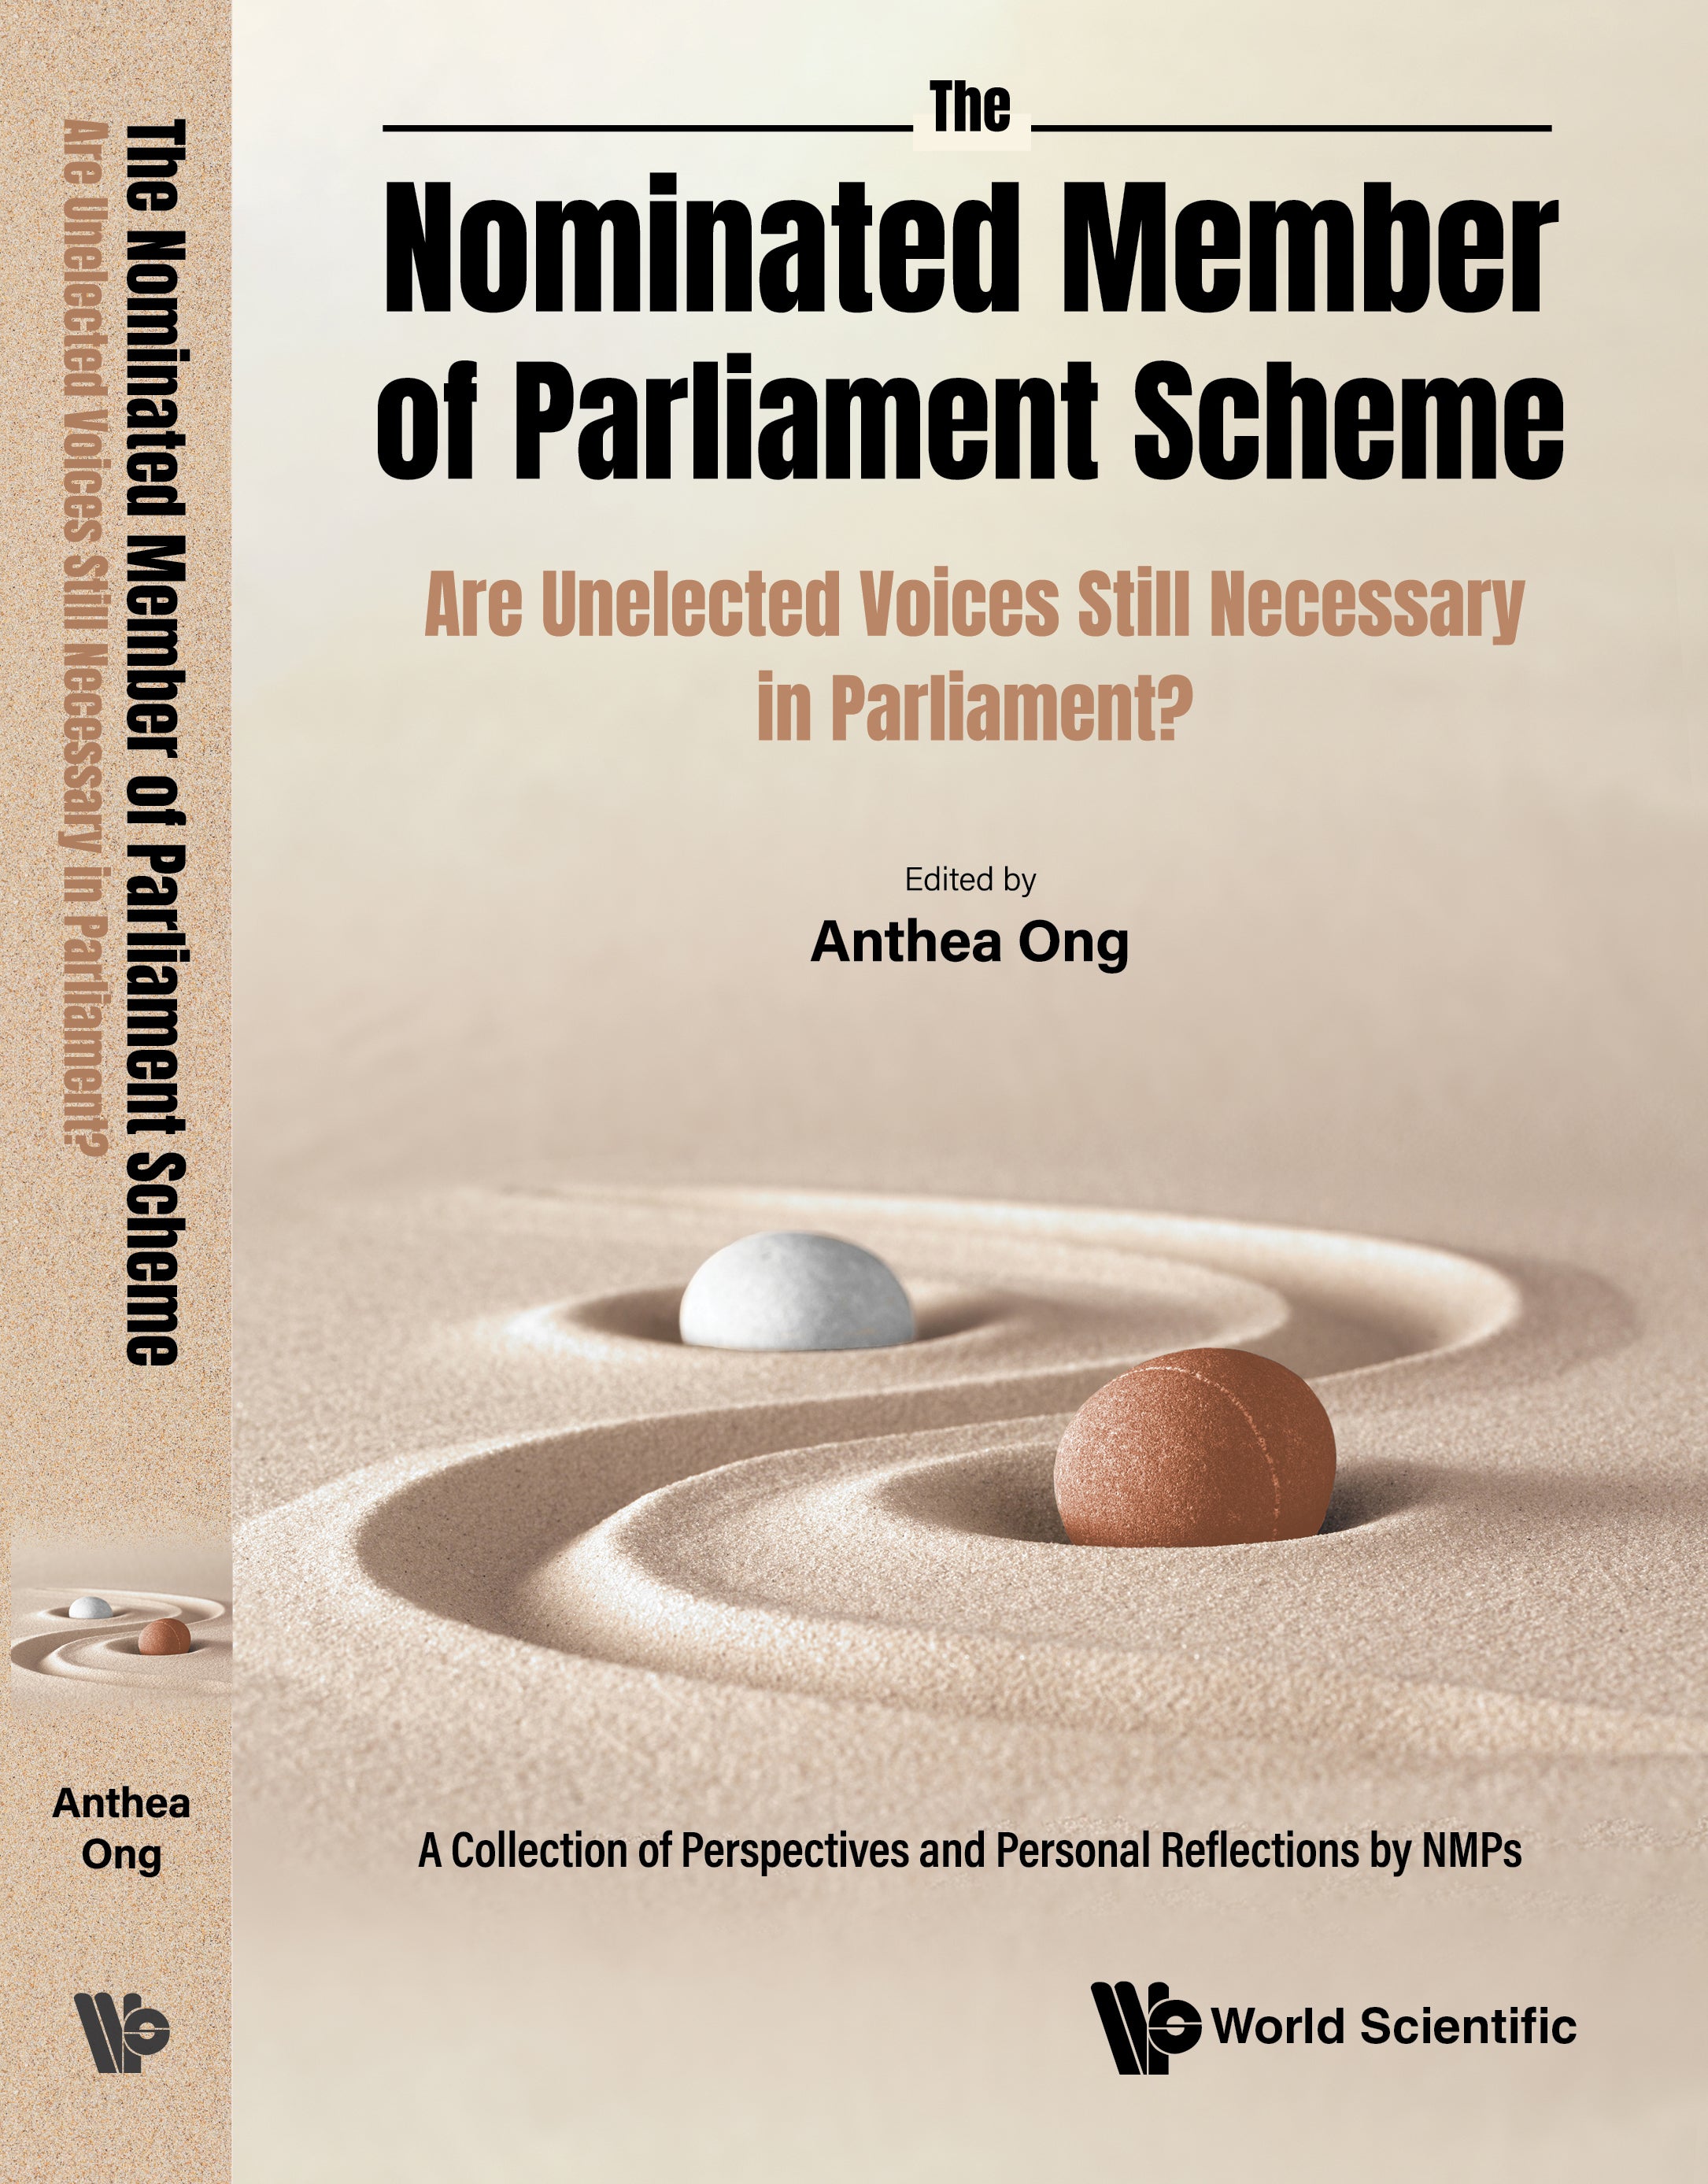 The Nominated Member of Parliament Scheme: Are Unelected Voices Still Necessary in Parliament? — A Collection of Perspectives and Personal Reflections by NMPs